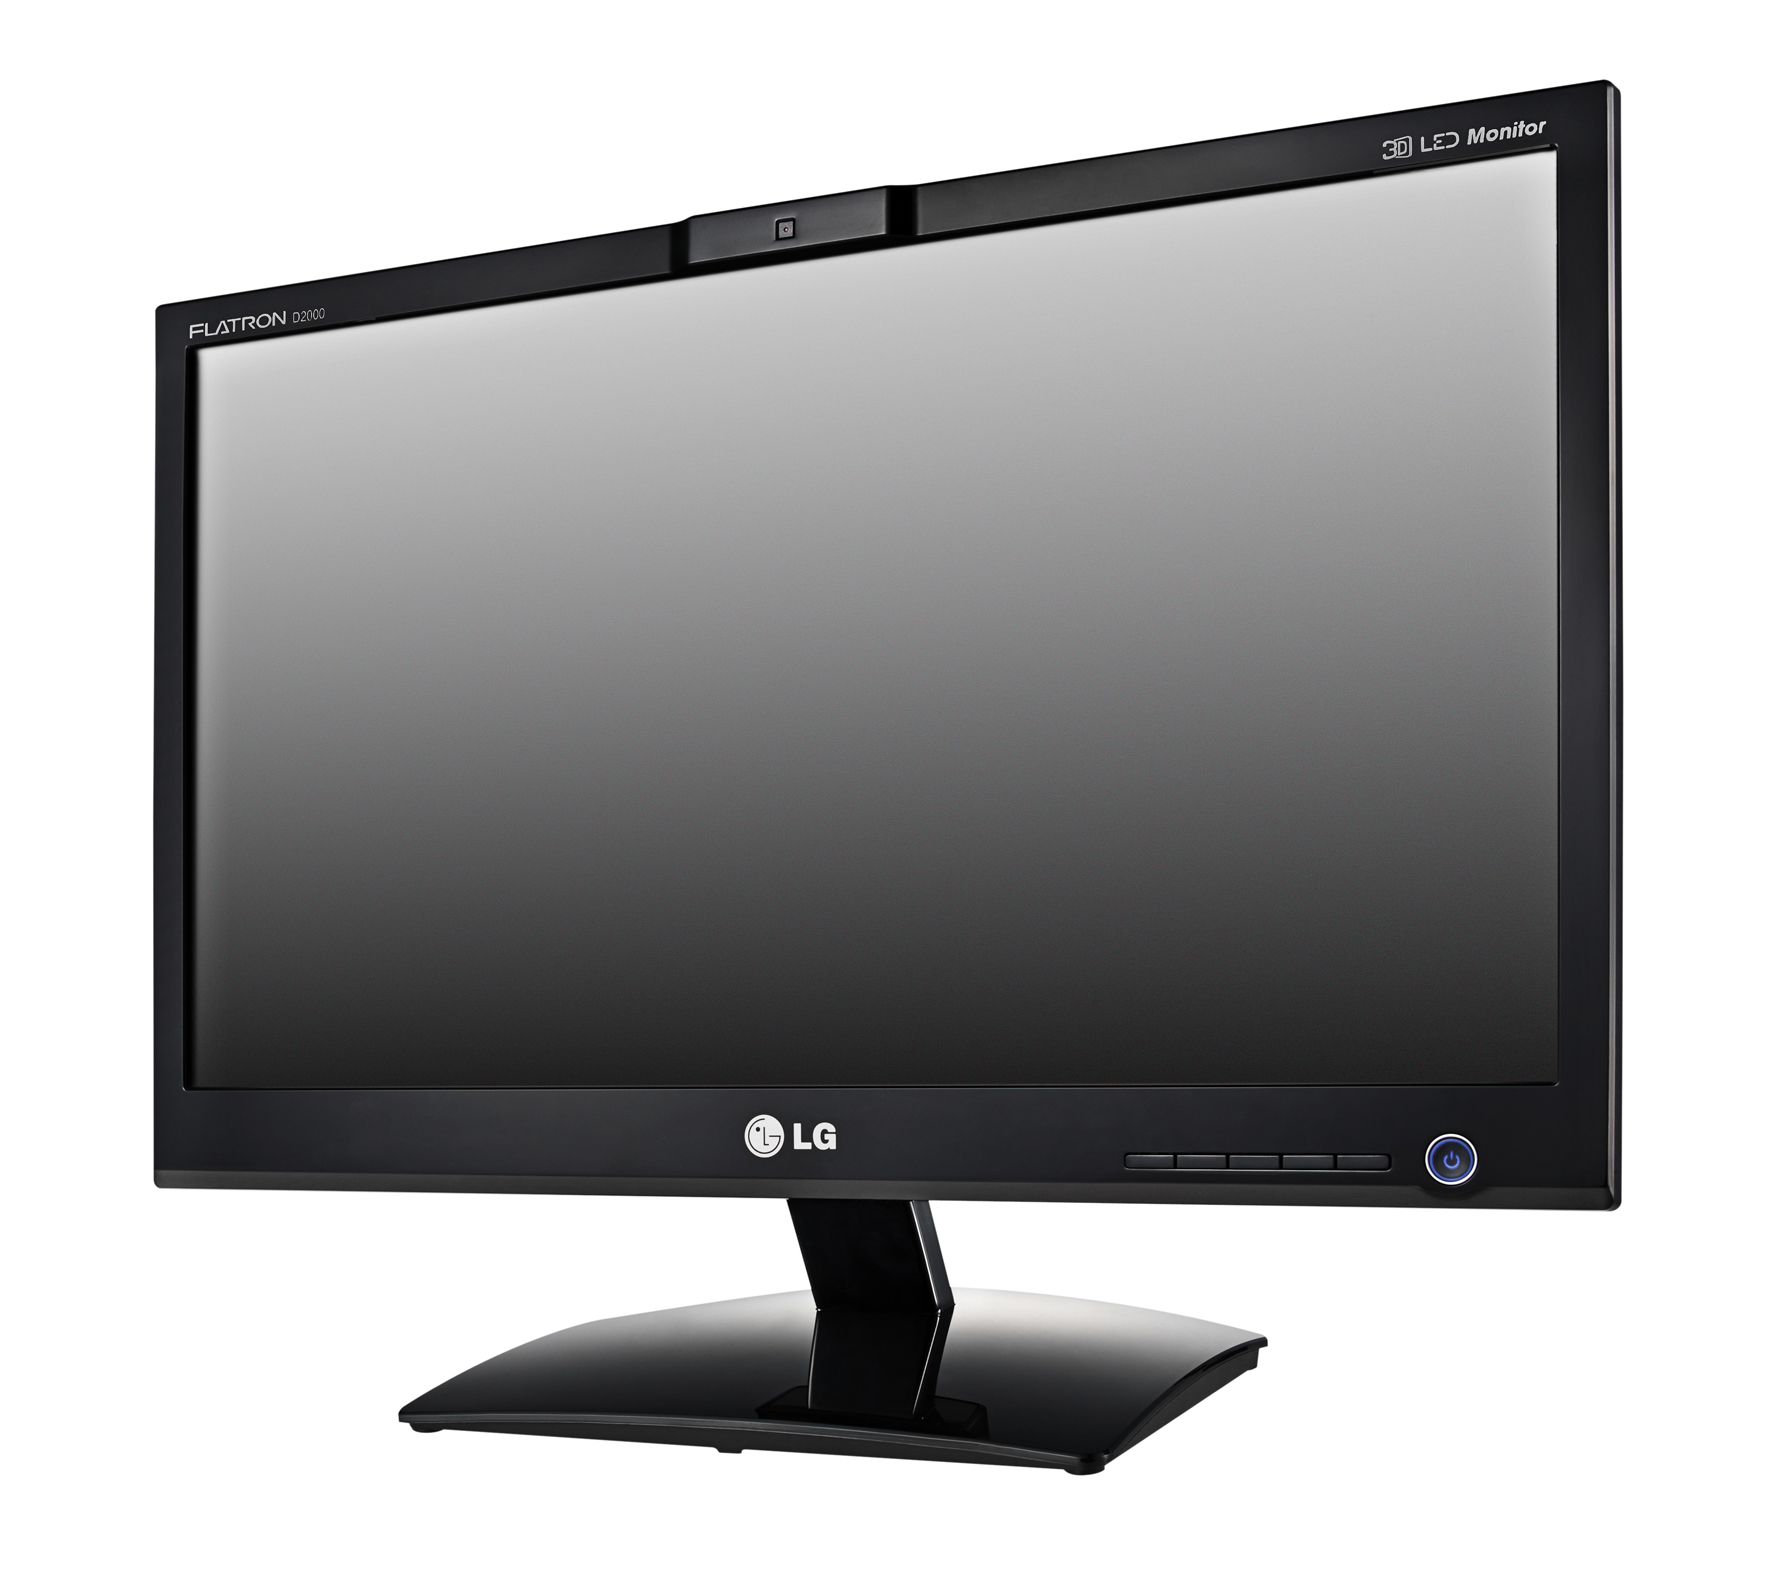 The world’s first glasses-free 3D monitor model D2000 by LG